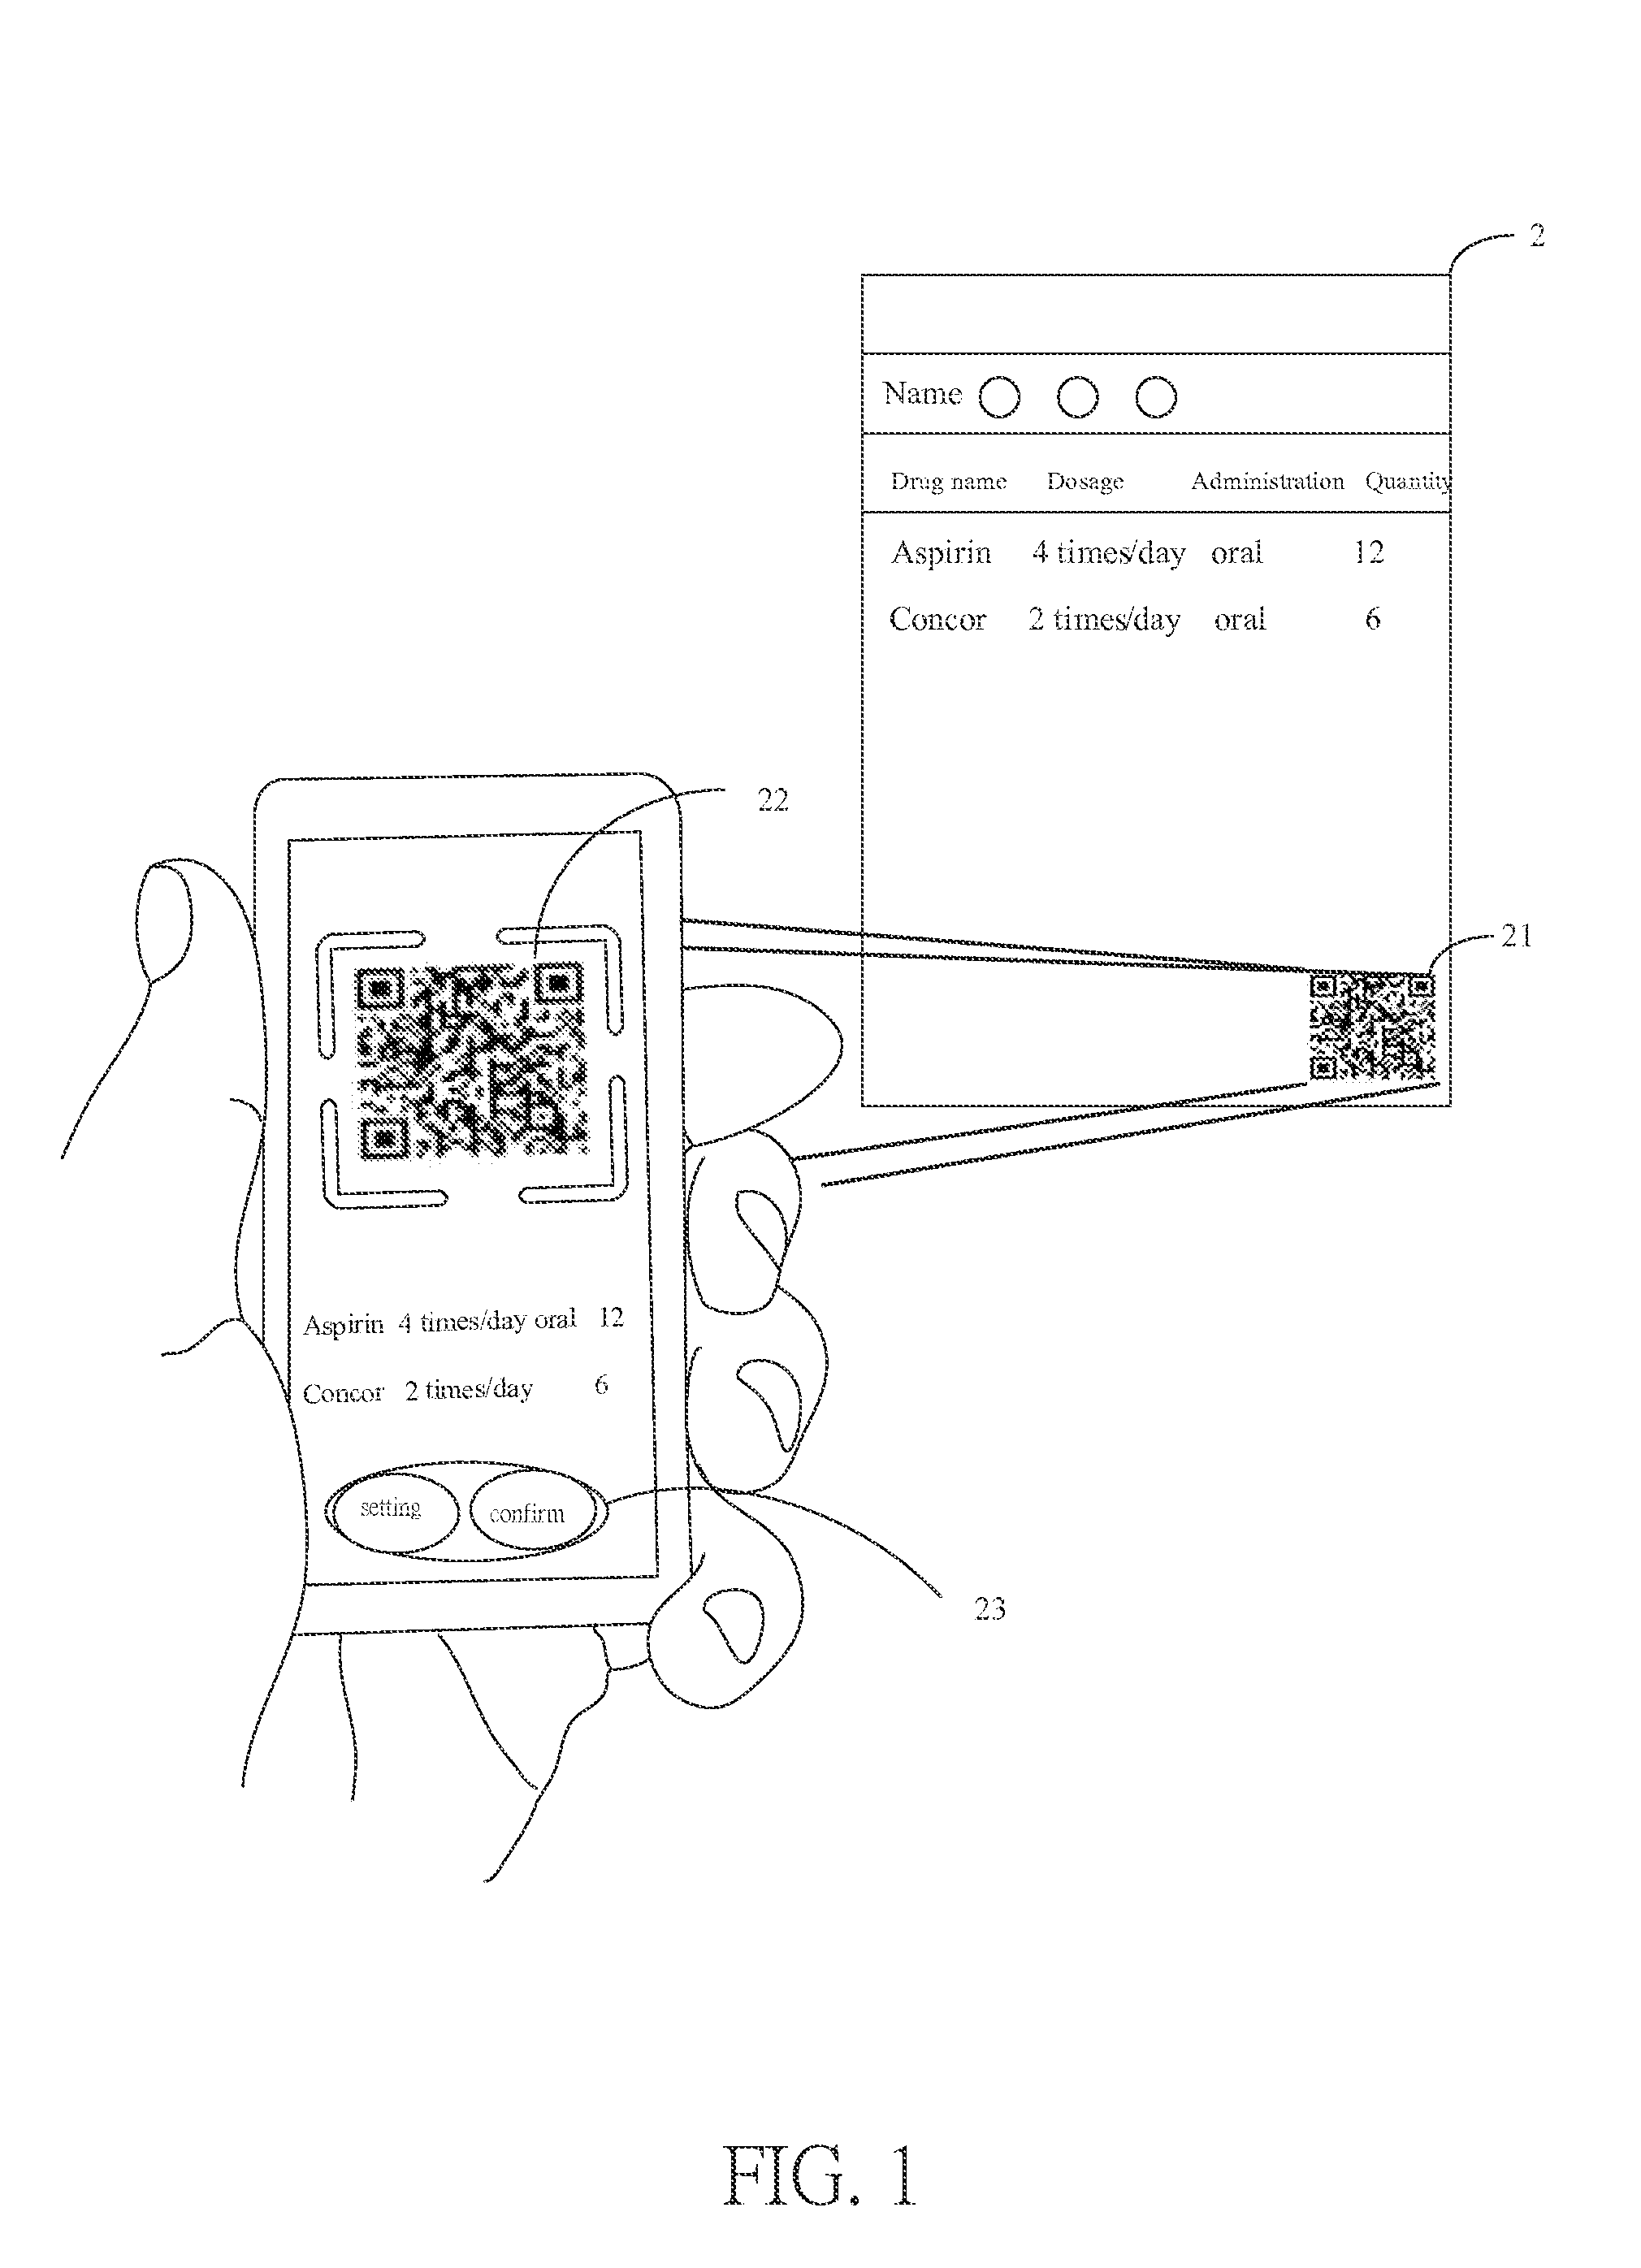 Assistance device for medication compliance